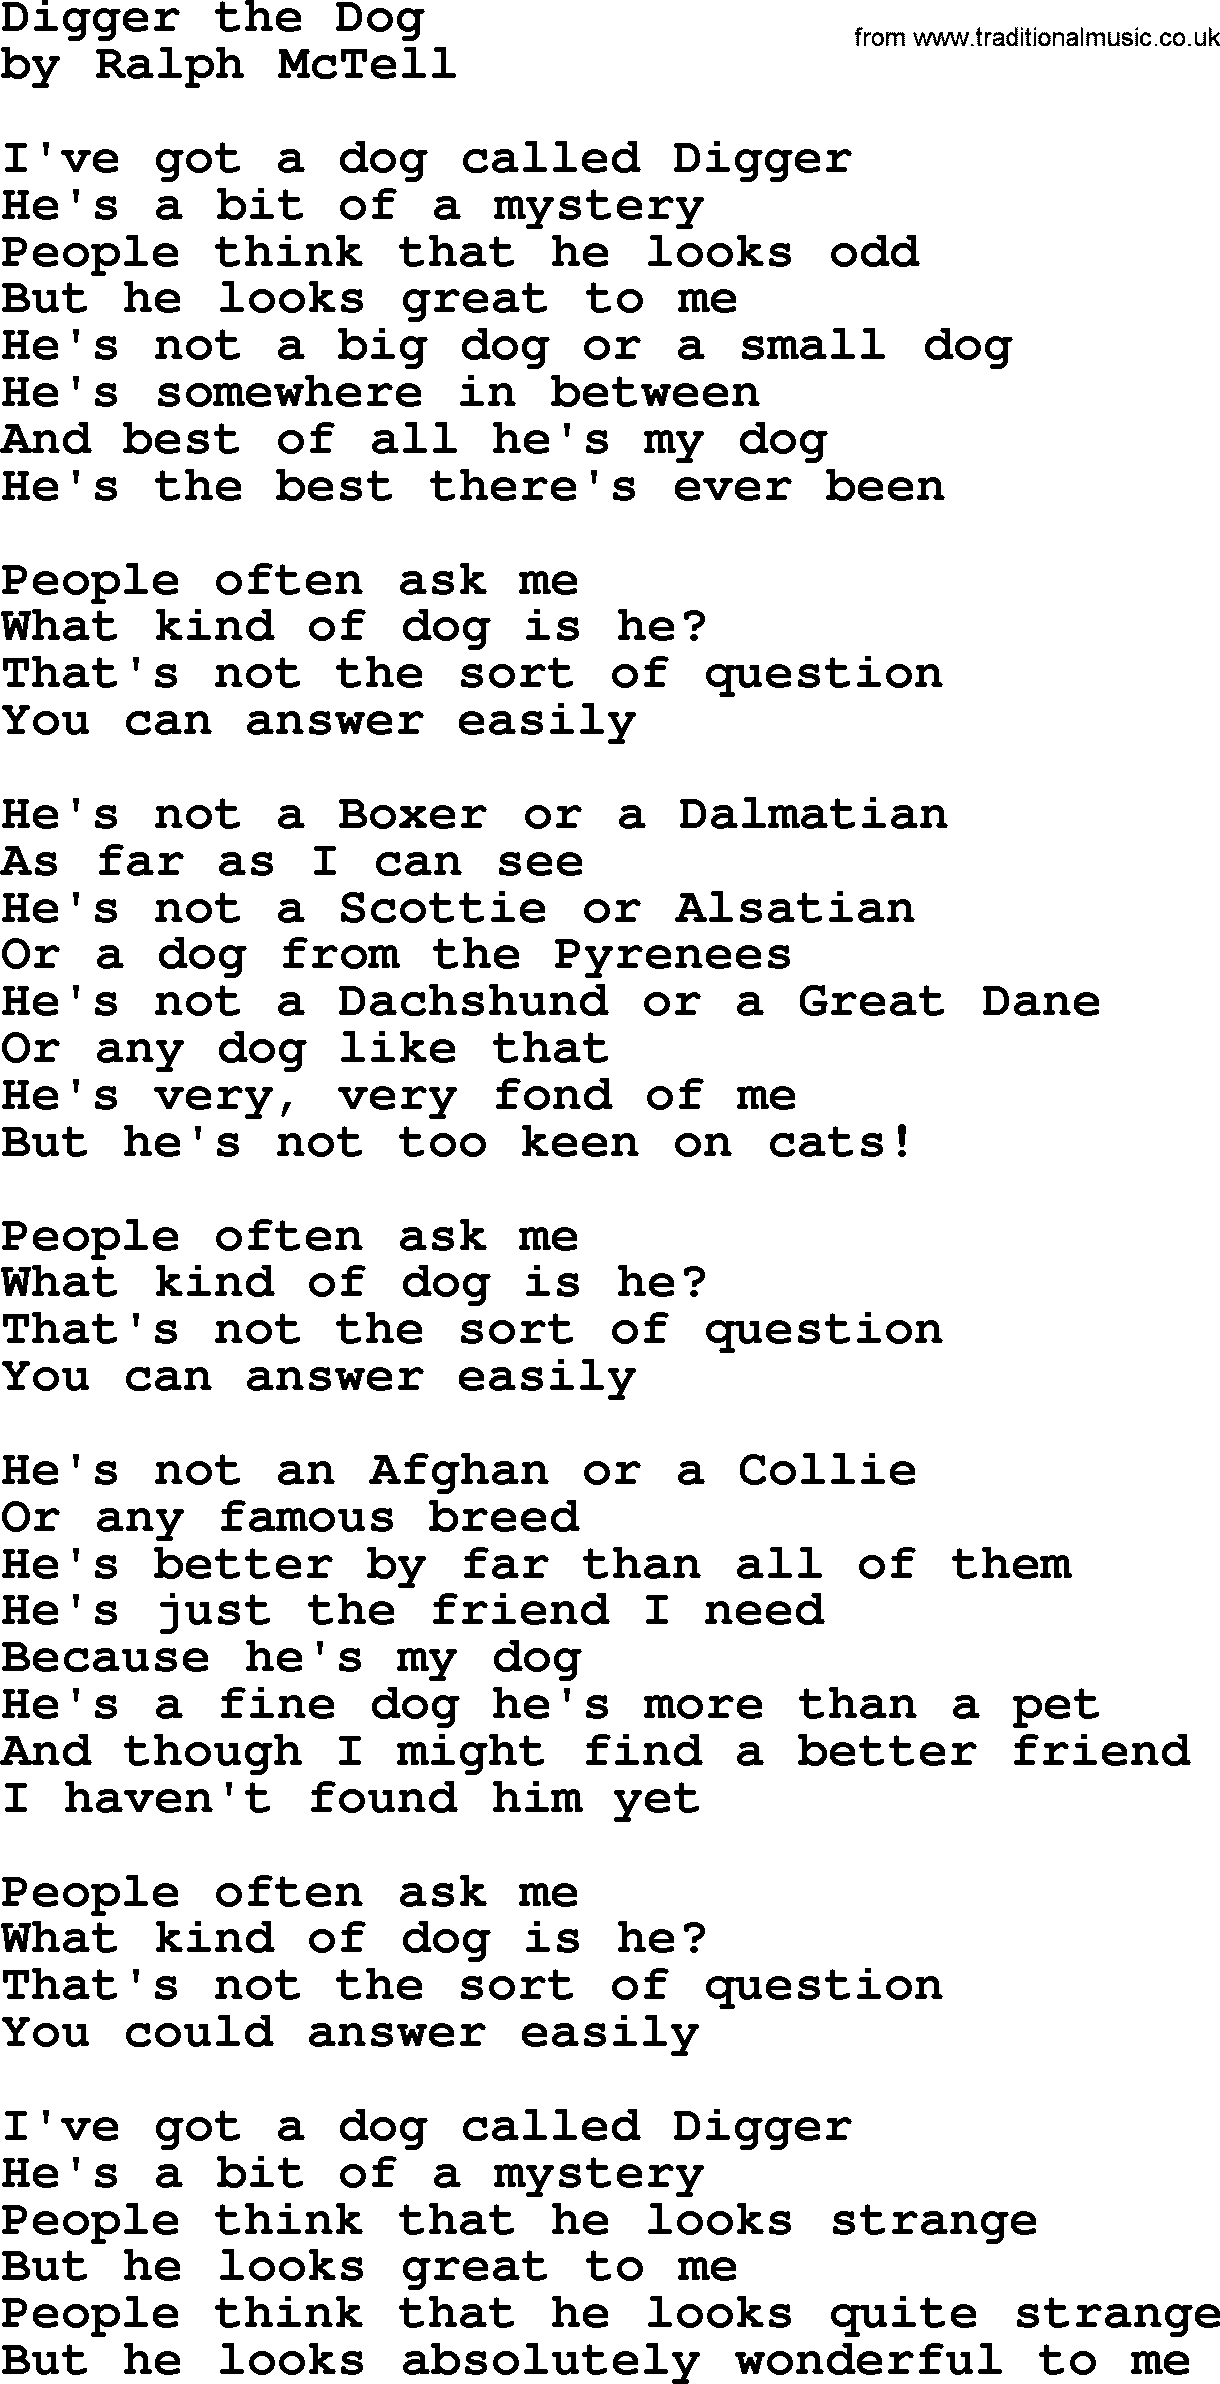 Digger The Dog.txt - by Ralph McTell lyrics and chords